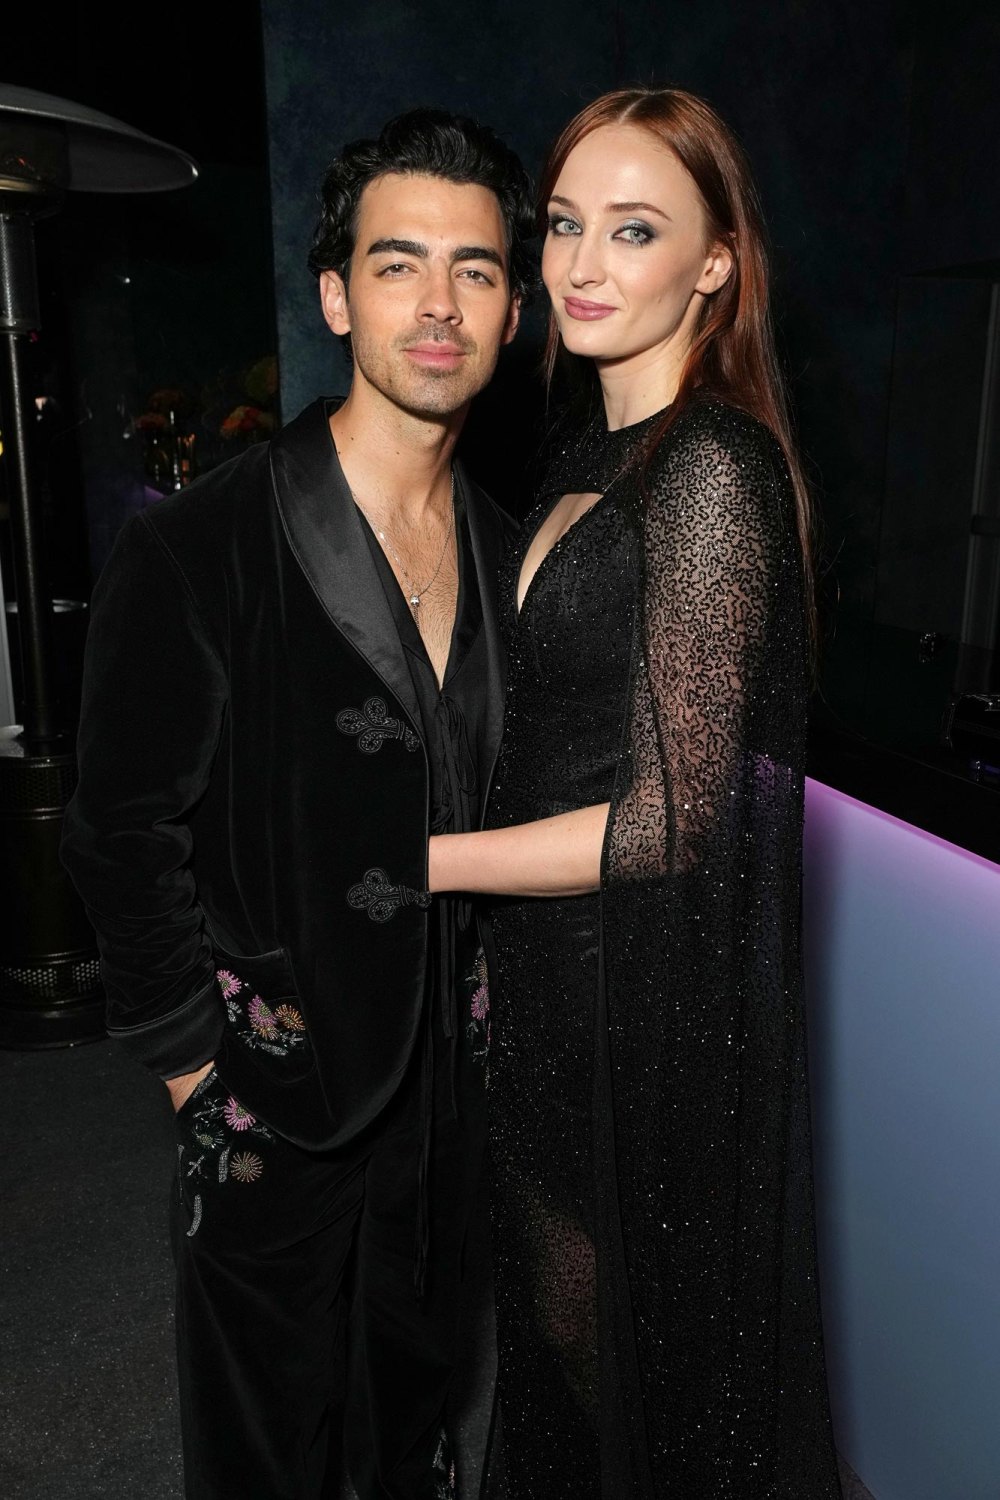 Joe Jonas and Sophie Turner to Make Final Custody Decision After Testing Out Arrangement 342